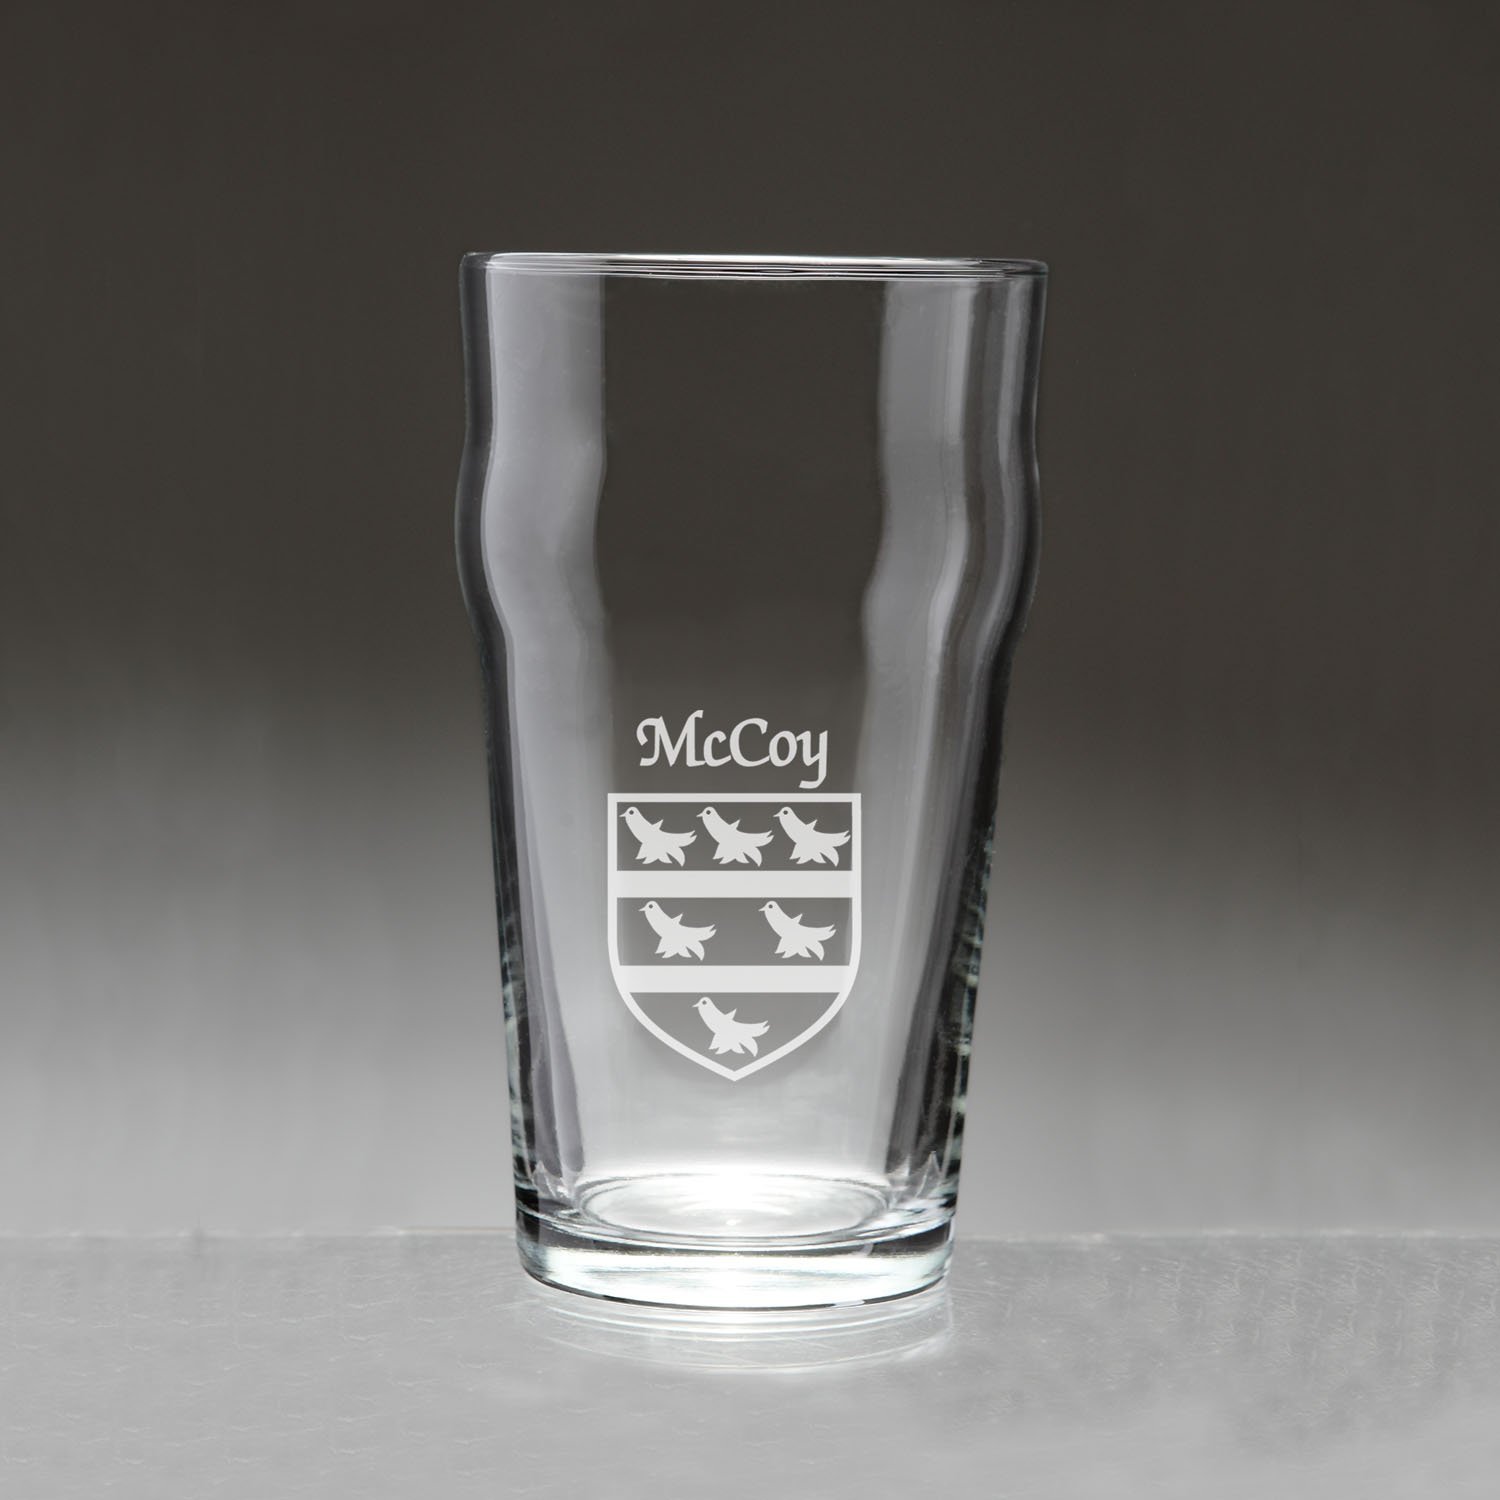 Primary image for McCoy Irish Coat of Arms Pub Glasses - Set of 4 (Sand Etched)